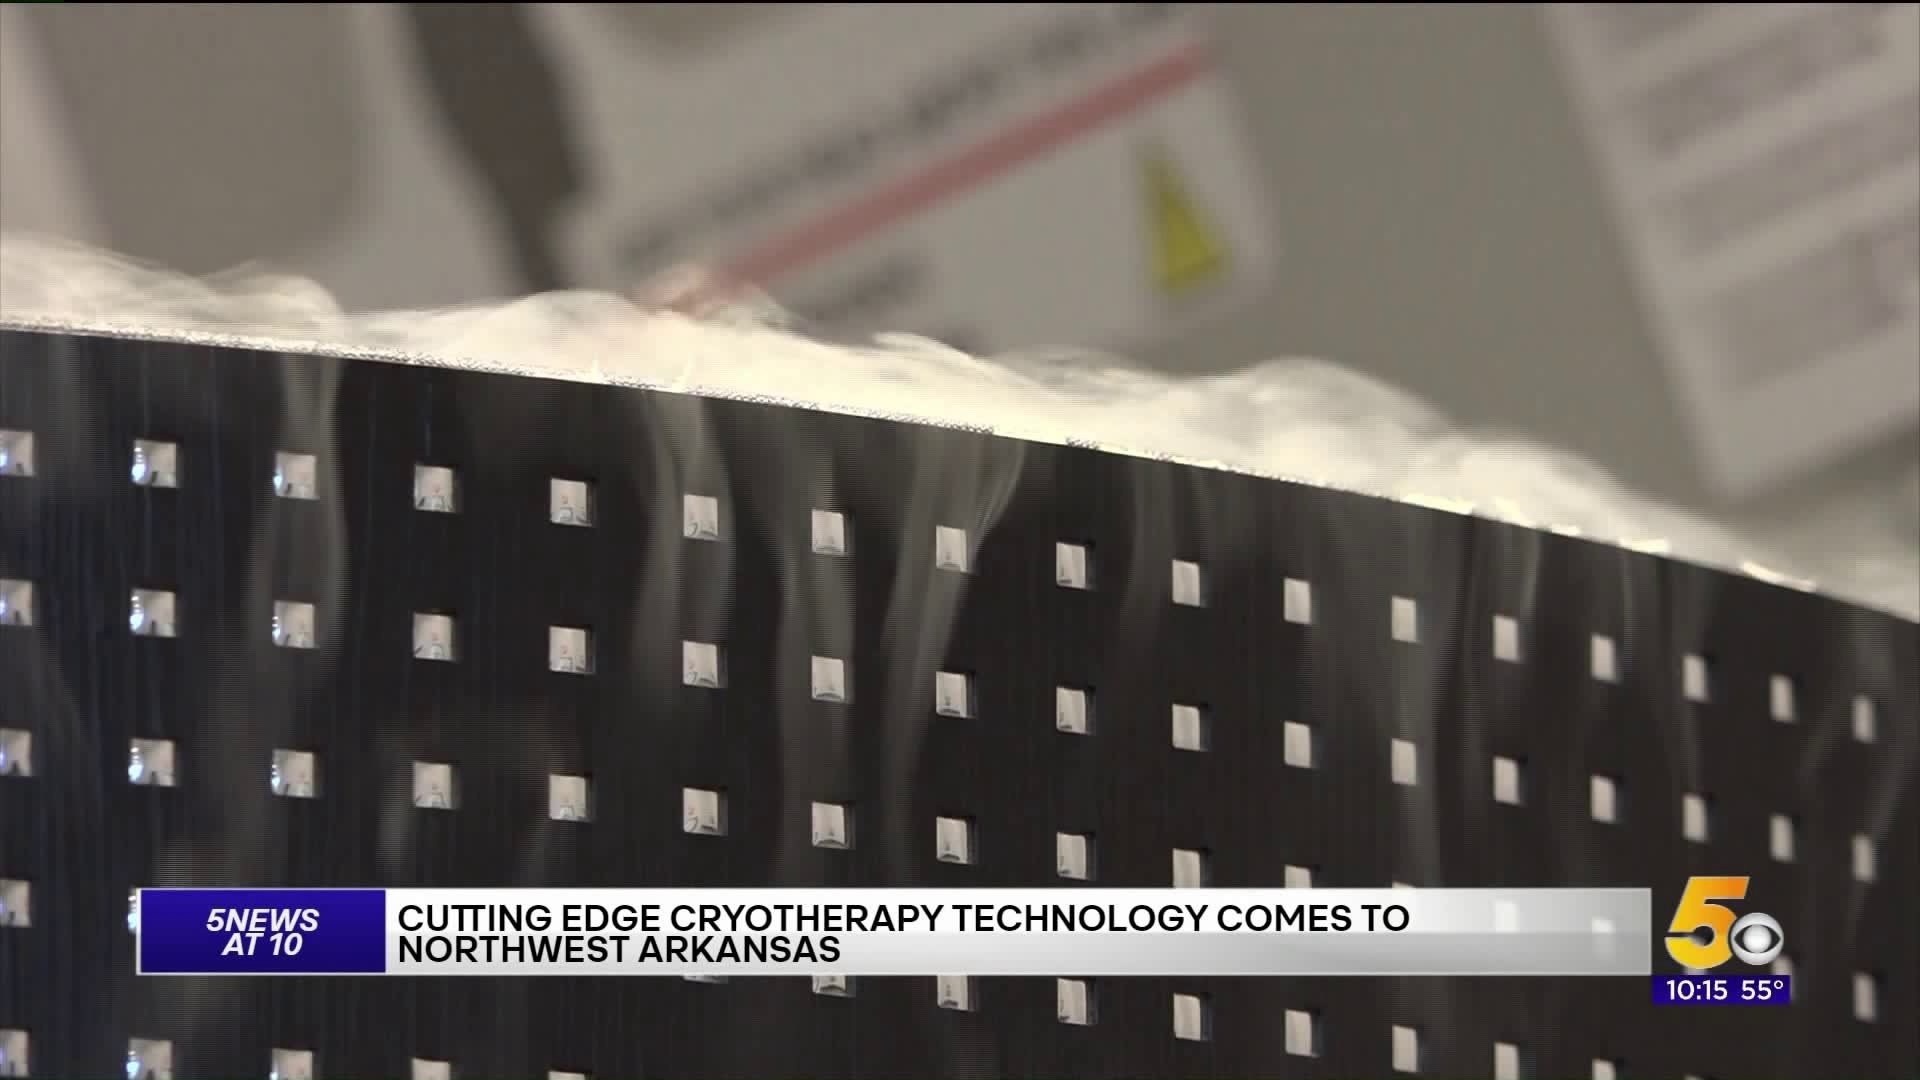 Cutting edge cryotherapy technology comes to Northwest Arkansas